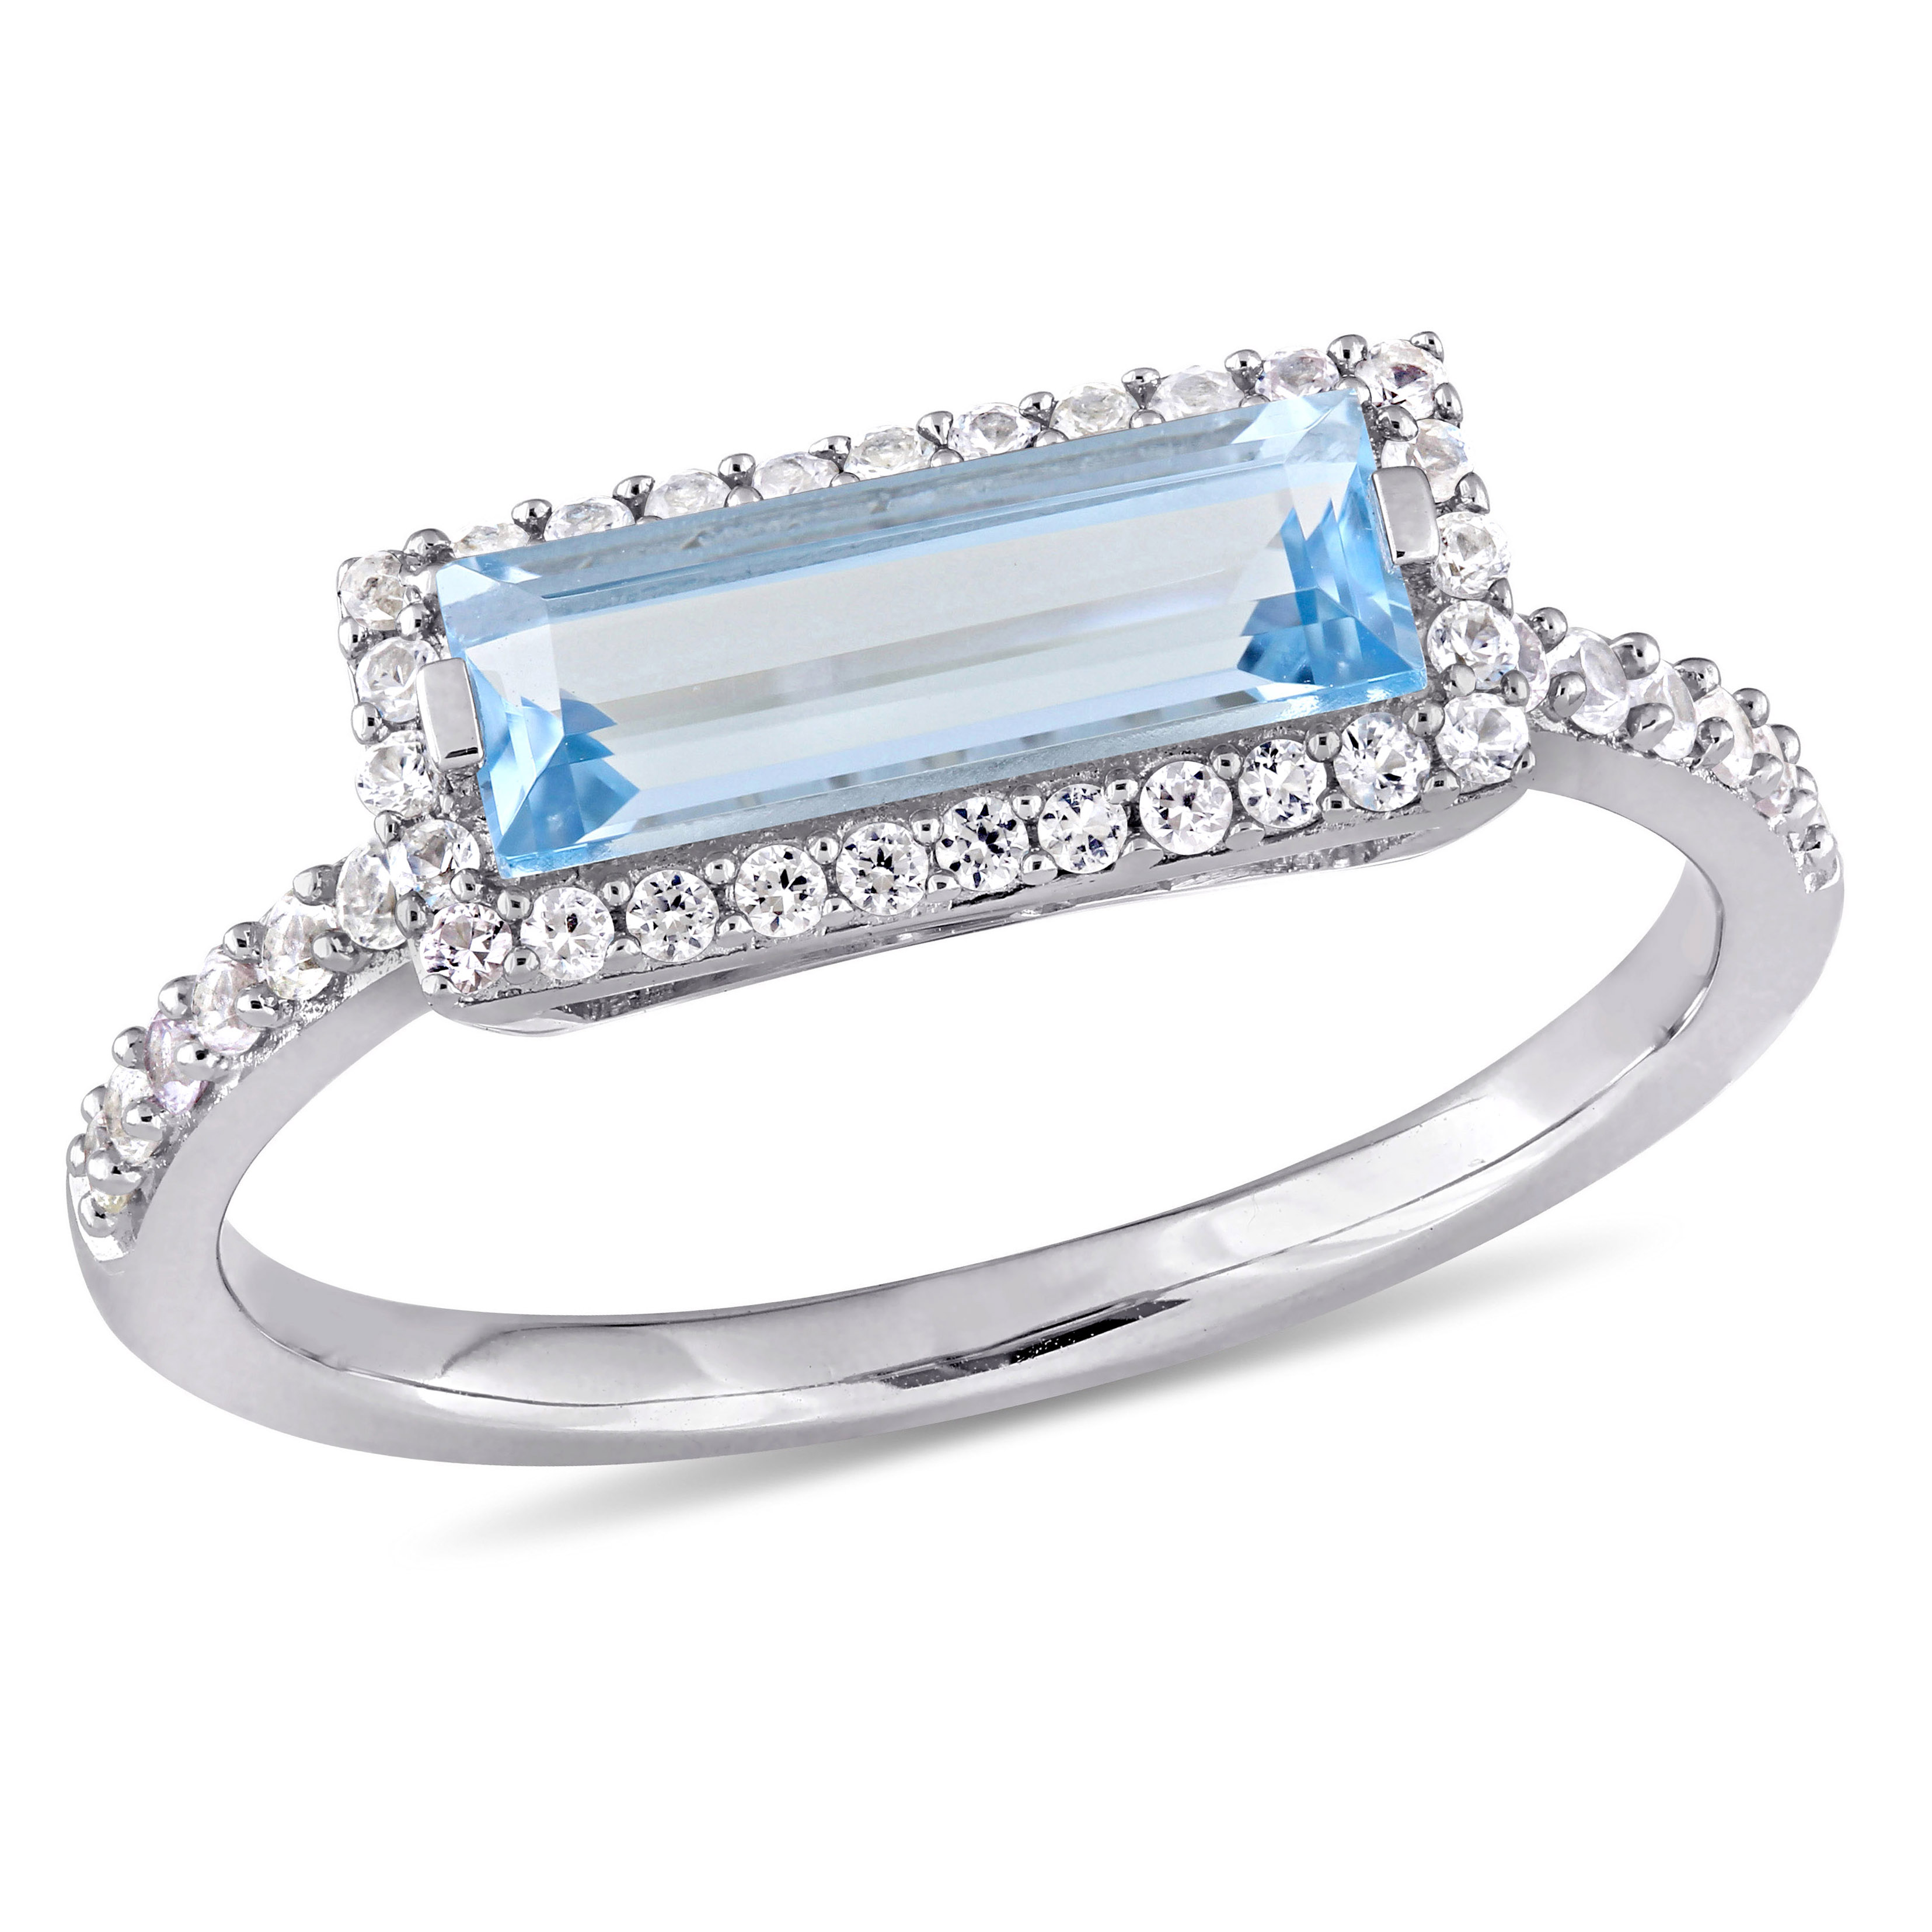 Baguette-Cut Blue Topaz and White Sapphire Halo Ring in Sterling Silver